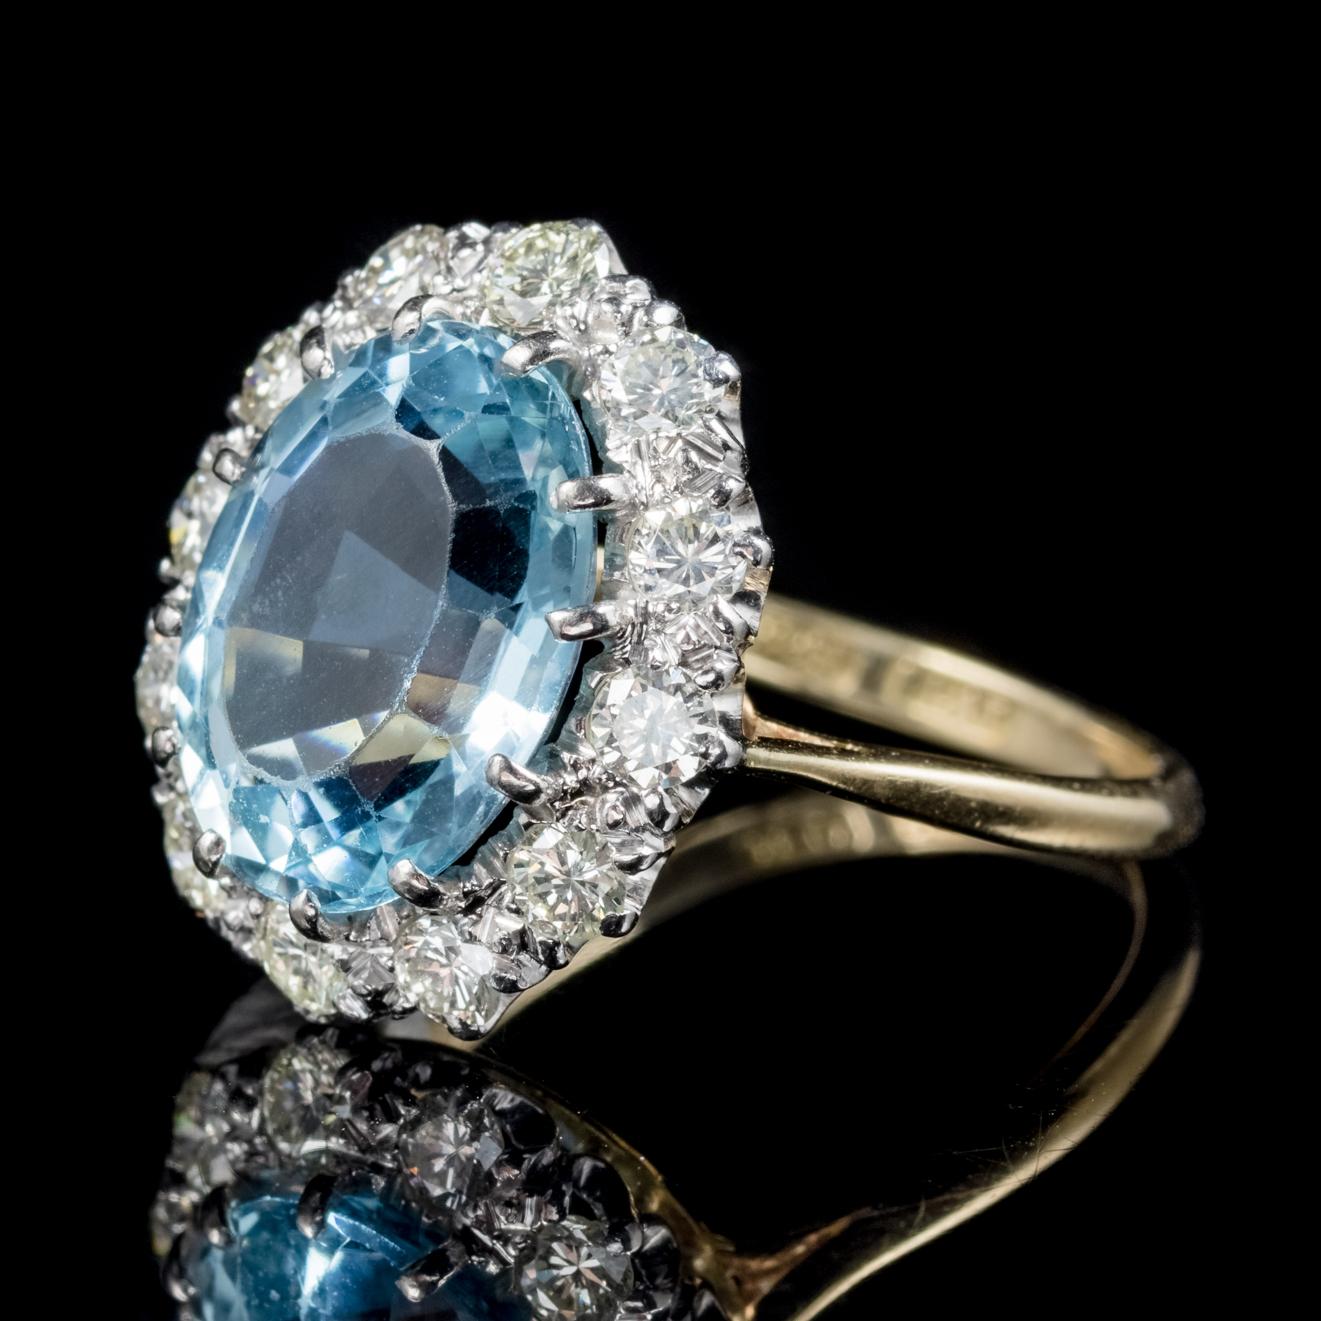 A spectacular antique Aquamarine and Diamond ring from the Victorian era, Circa 1900. 

Adorned with a magnificent ocean blue Aquamarine which is approx. 6ct and surrounded by sparkling Diamonds. 

Aquamarine is adored for its beautiful clear Ocean